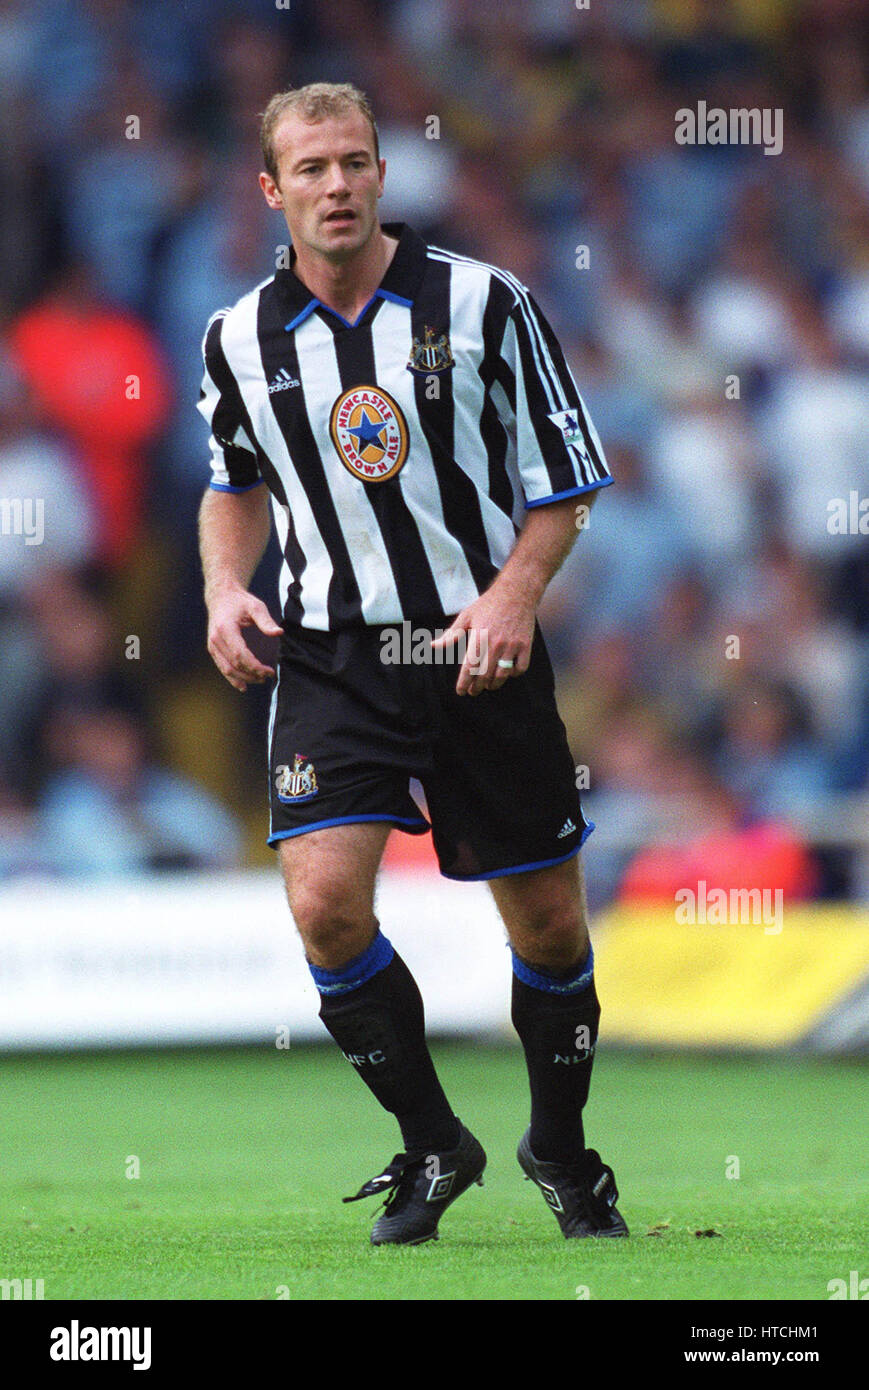 Alan Shearer and the Newcastle United years – 1997/98